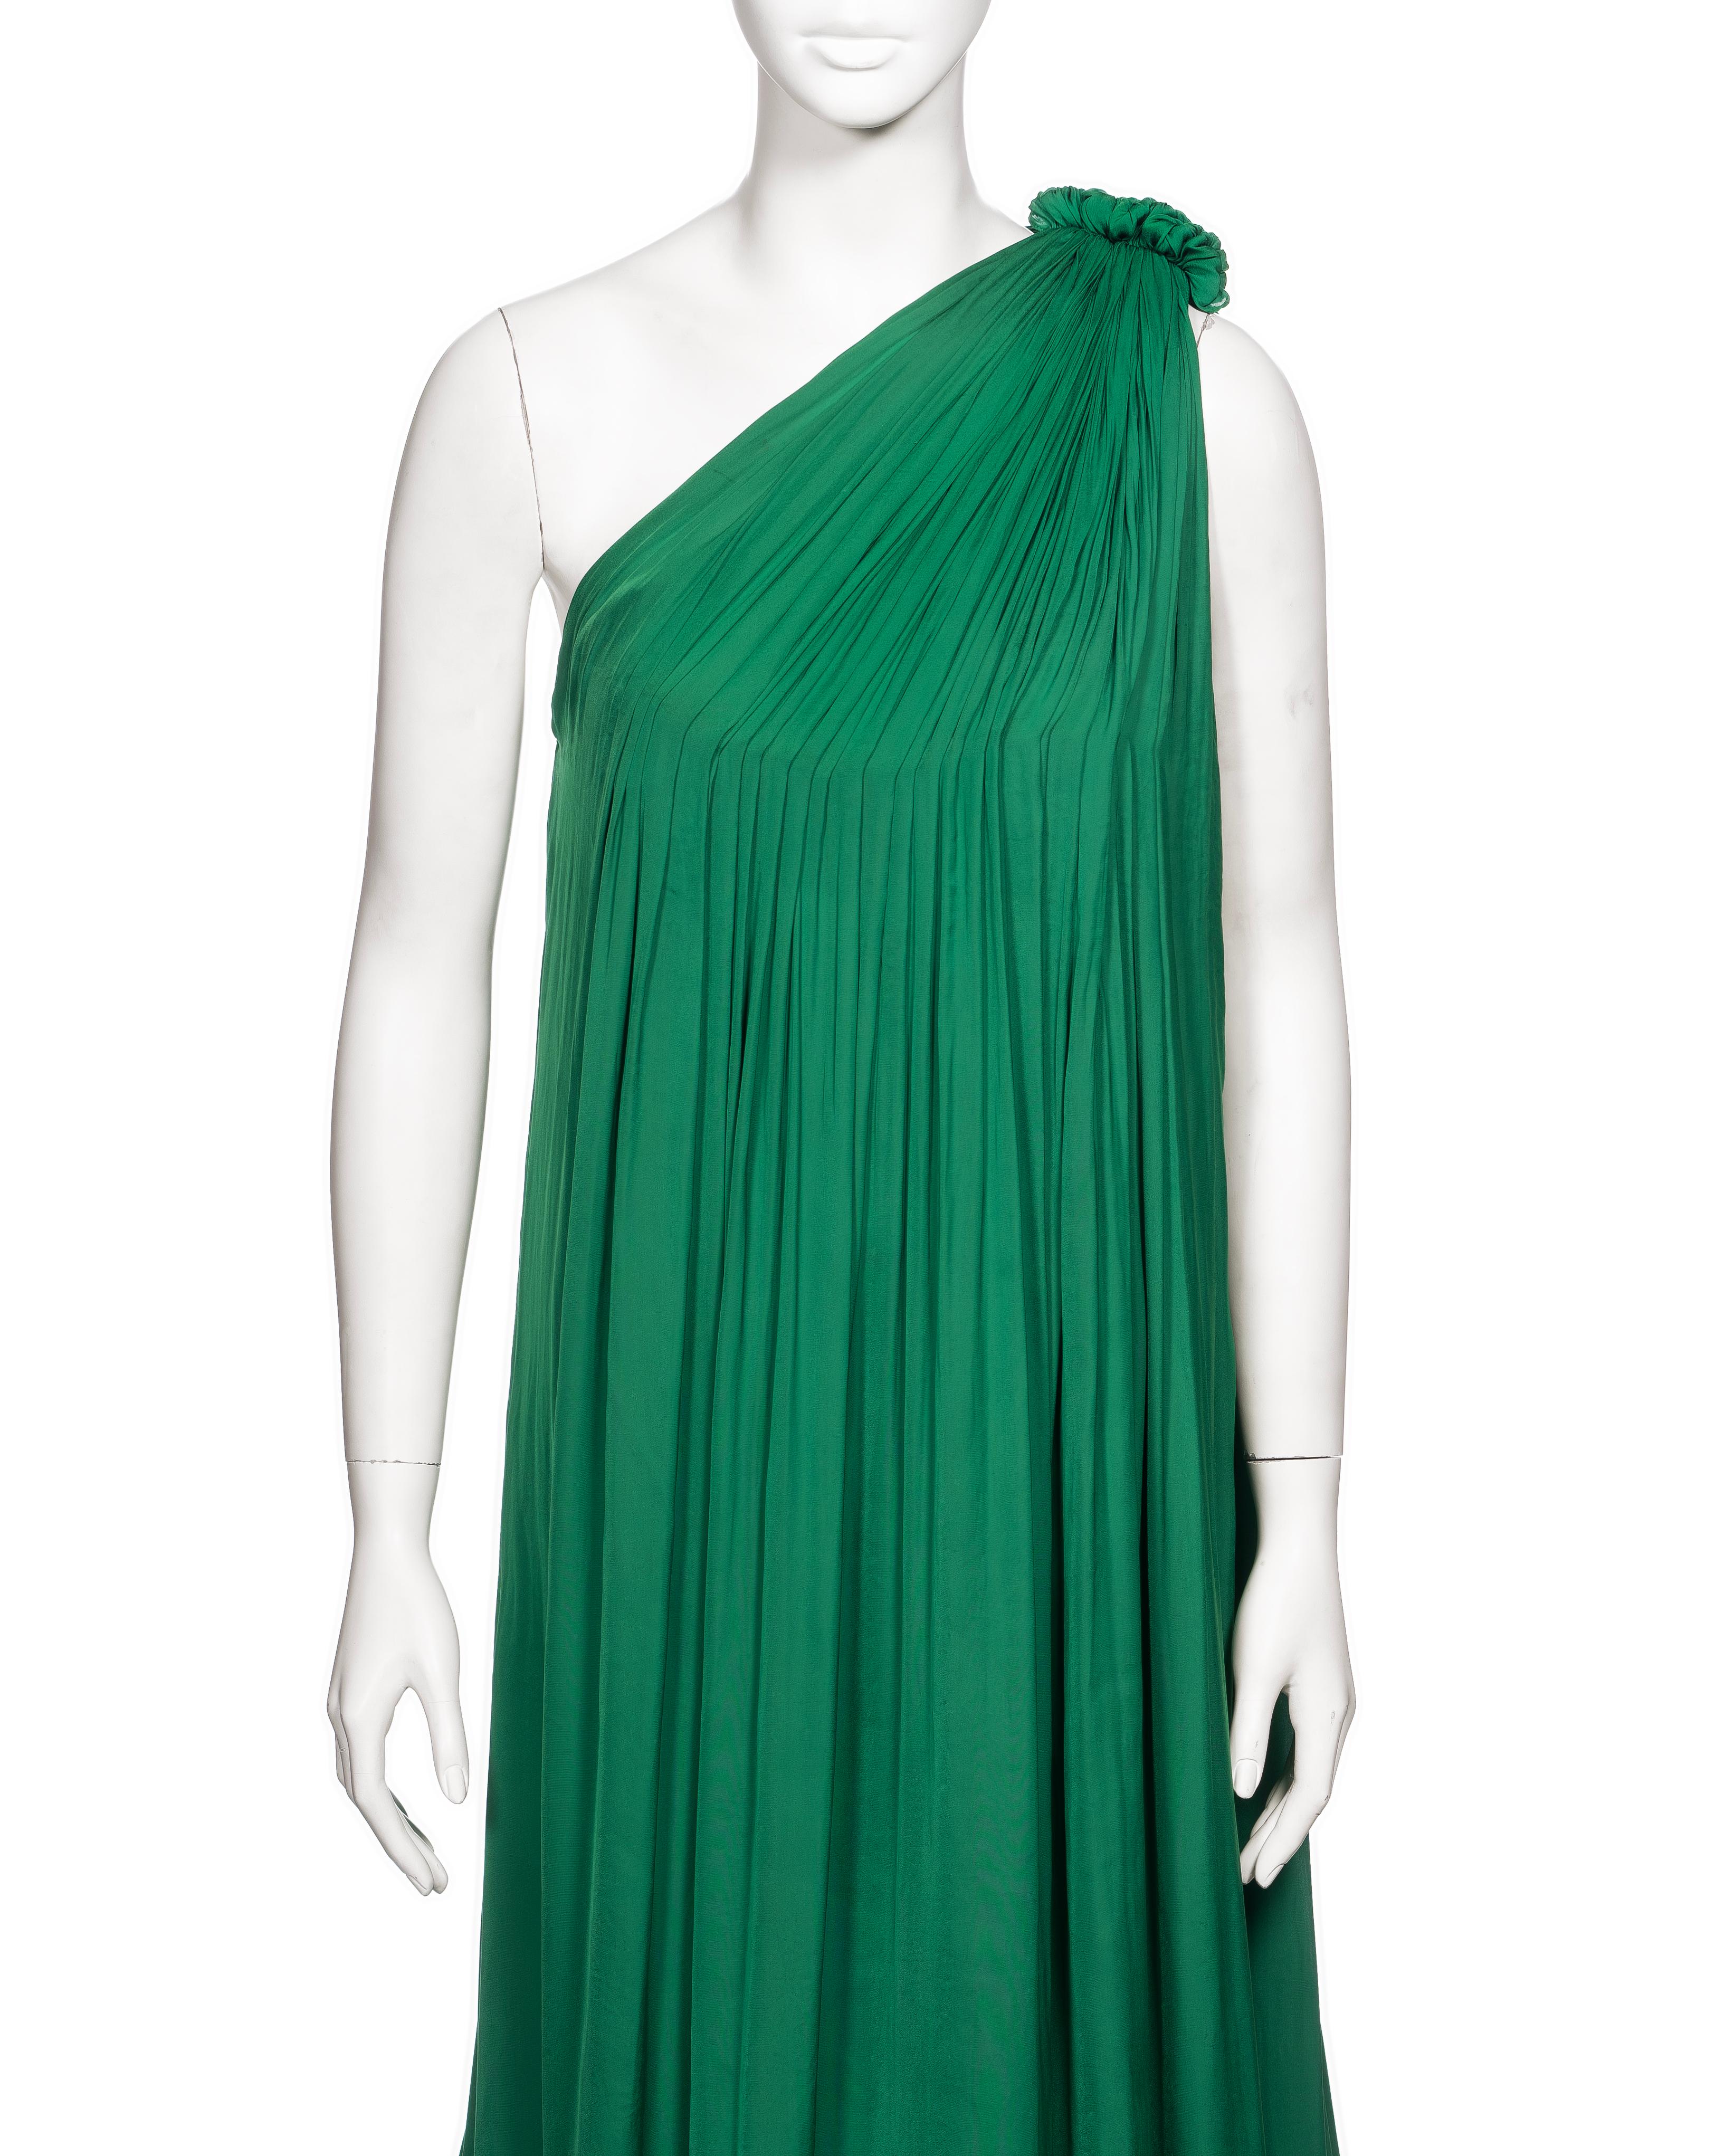 Women's Lanvin by Alber Elbaz Green Pleated One-Shoulder Evening Dress, SS 2008 For Sale